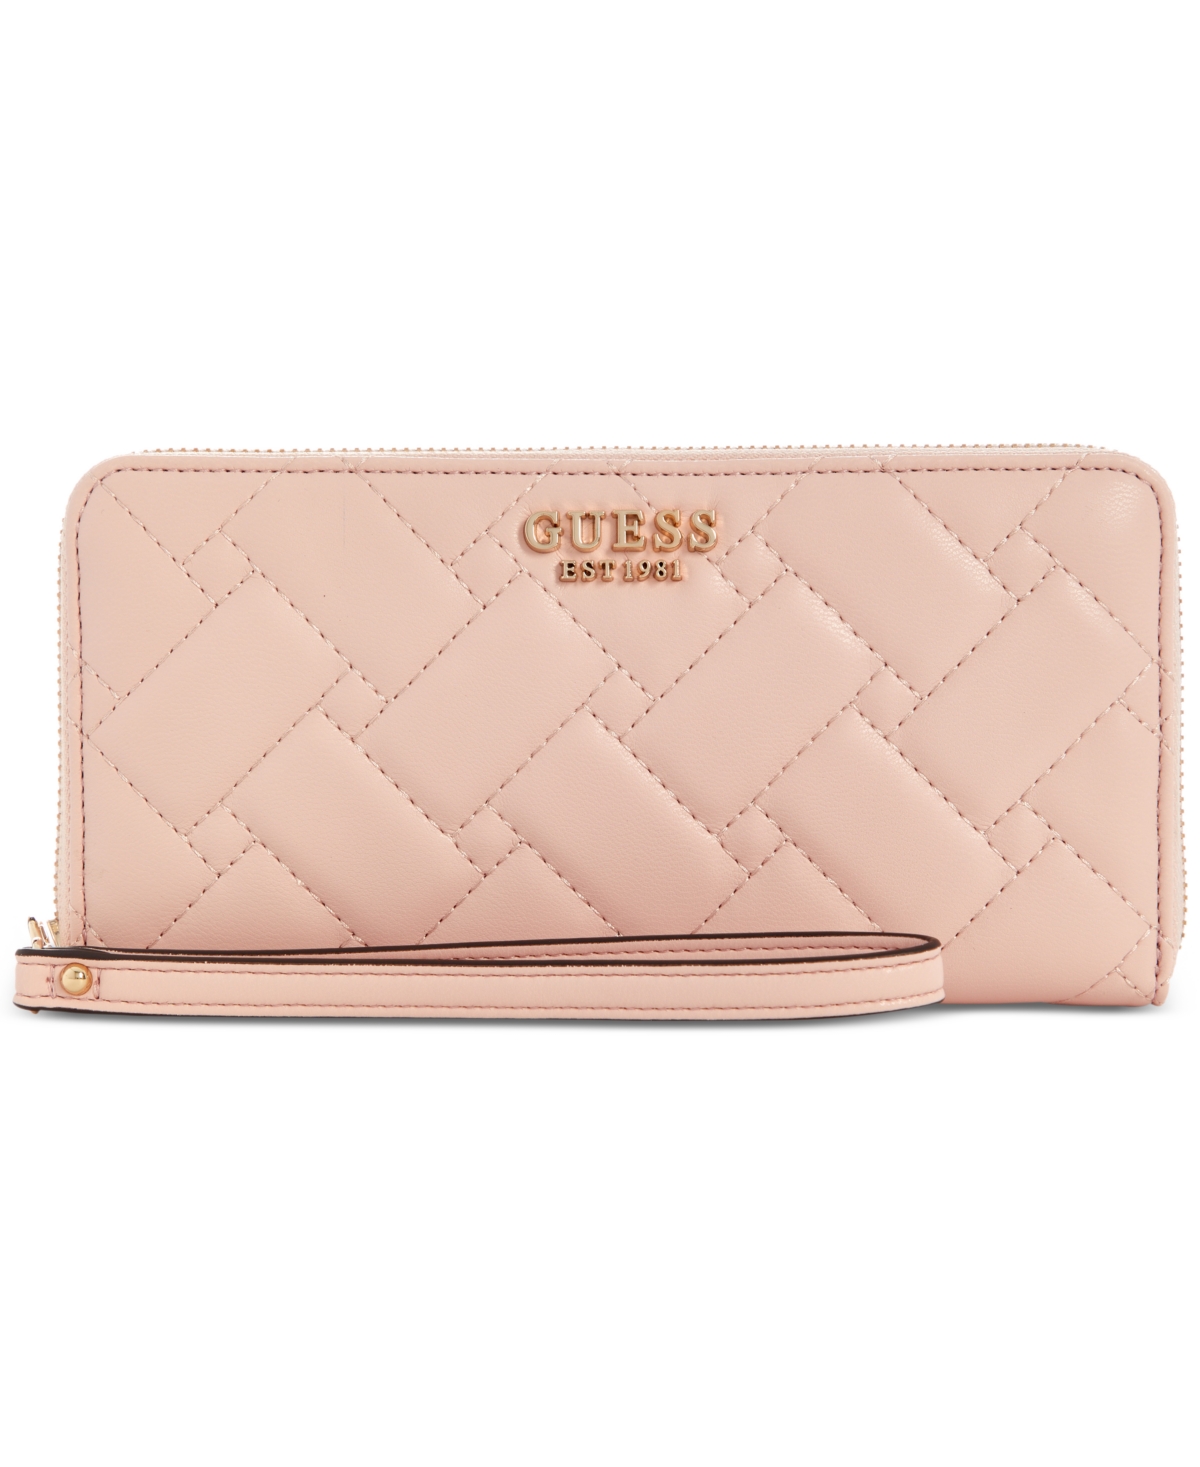 Guess Alanna Large Zip Around Wallet In Light Rose